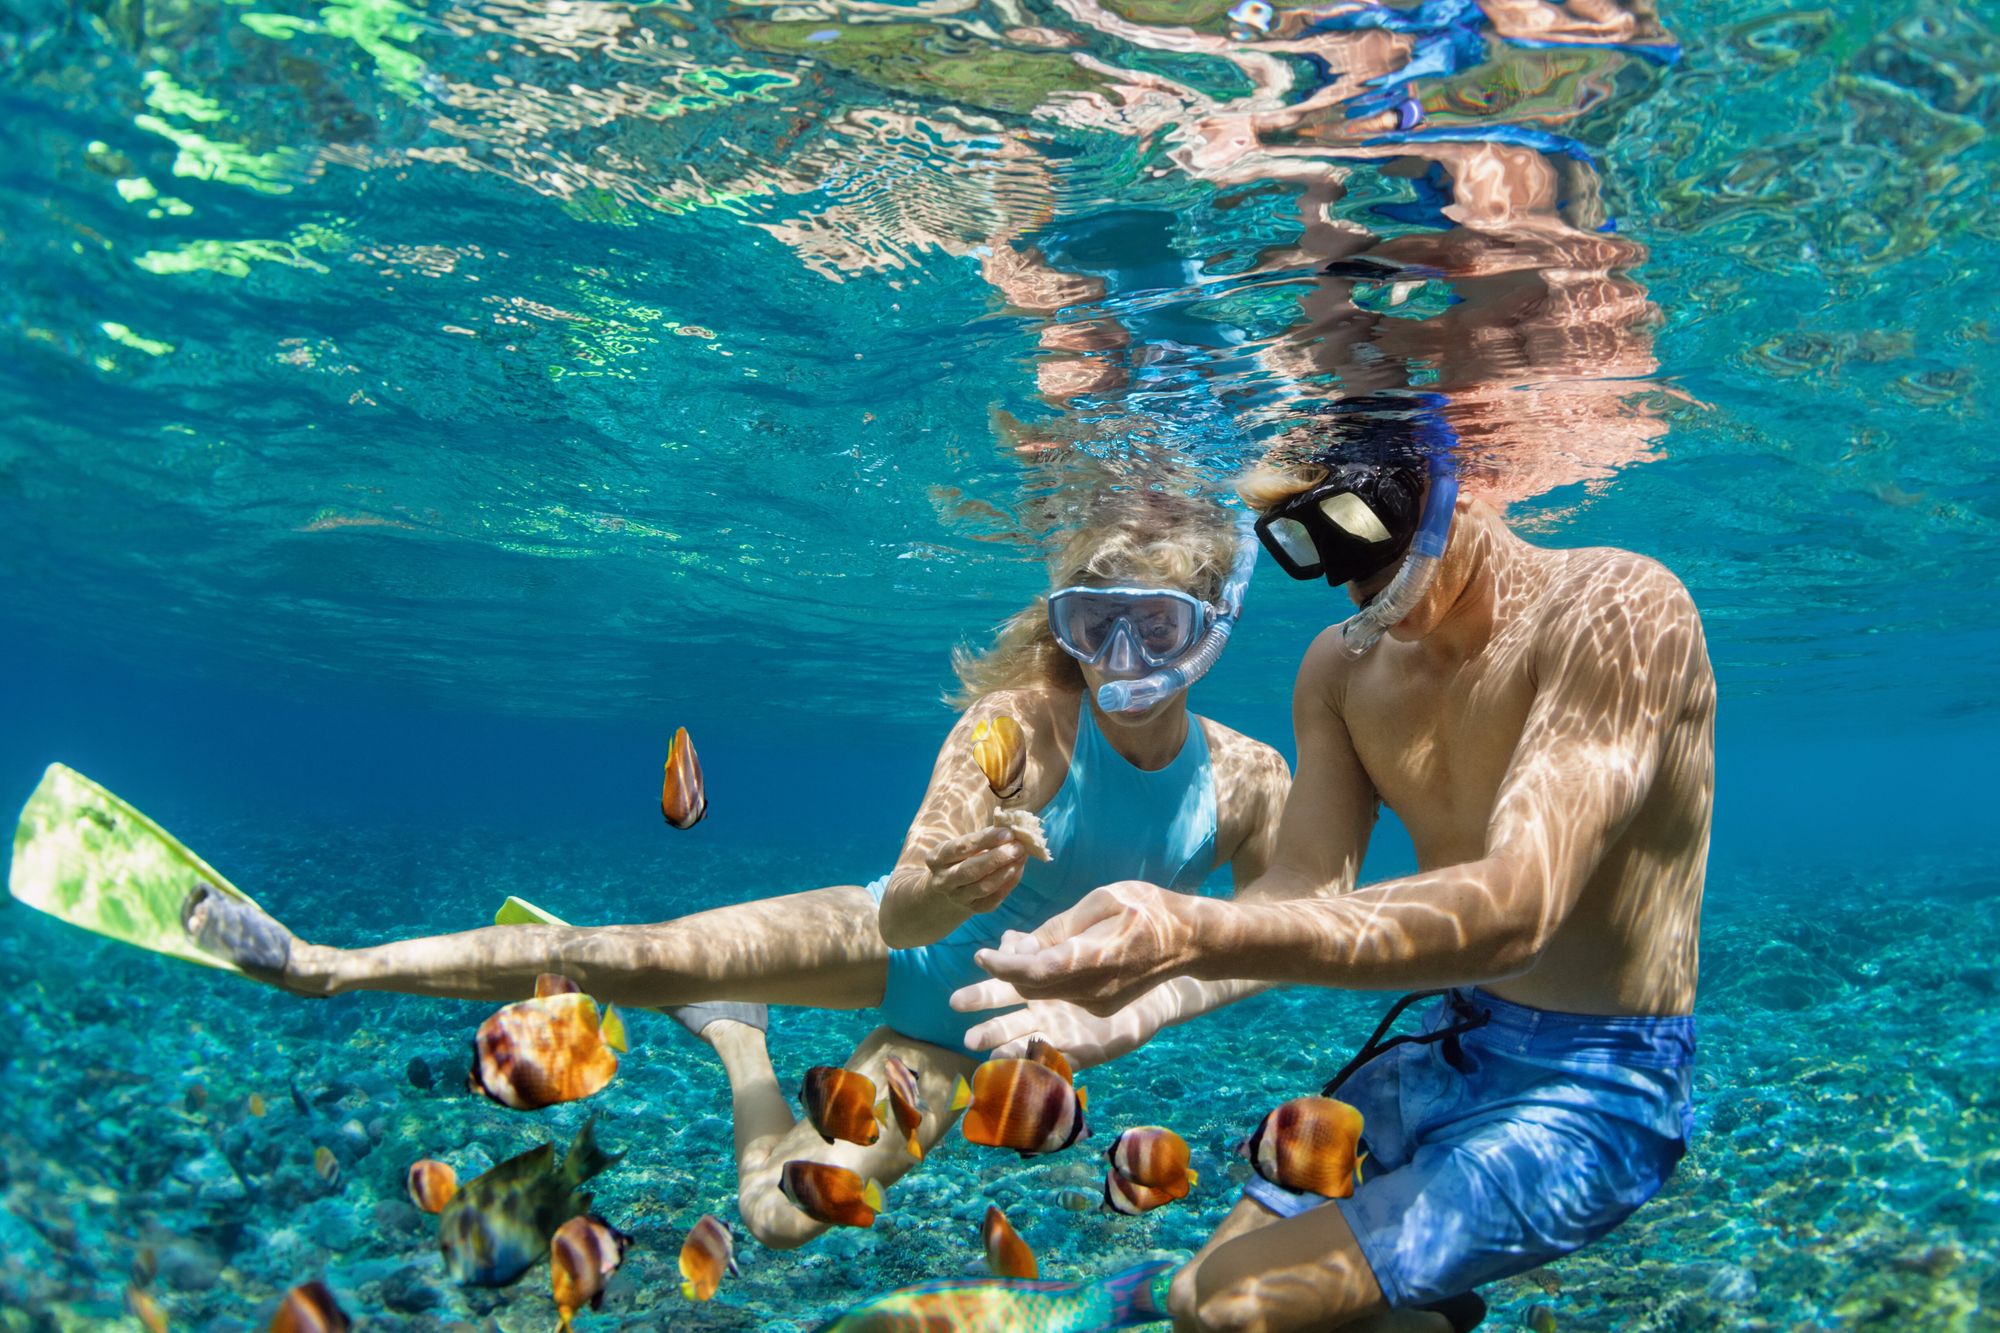 The 7 Most Amazing Snorkeling Spots in St. Lucia